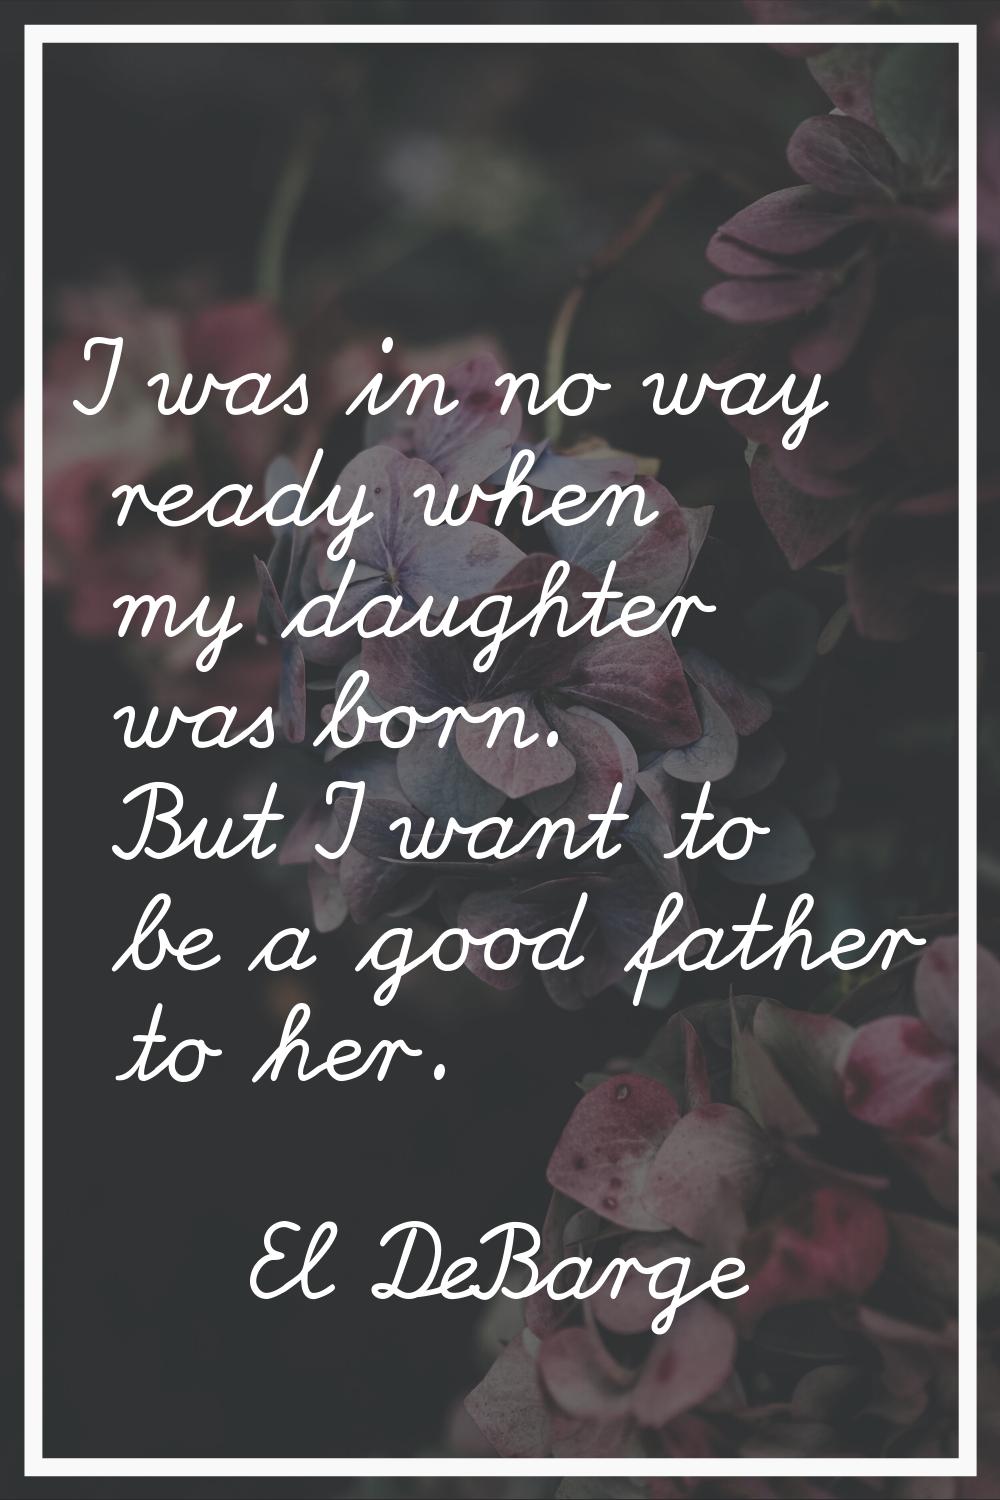 I was in no way ready when my daughter was born. But I want to be a good father to her.